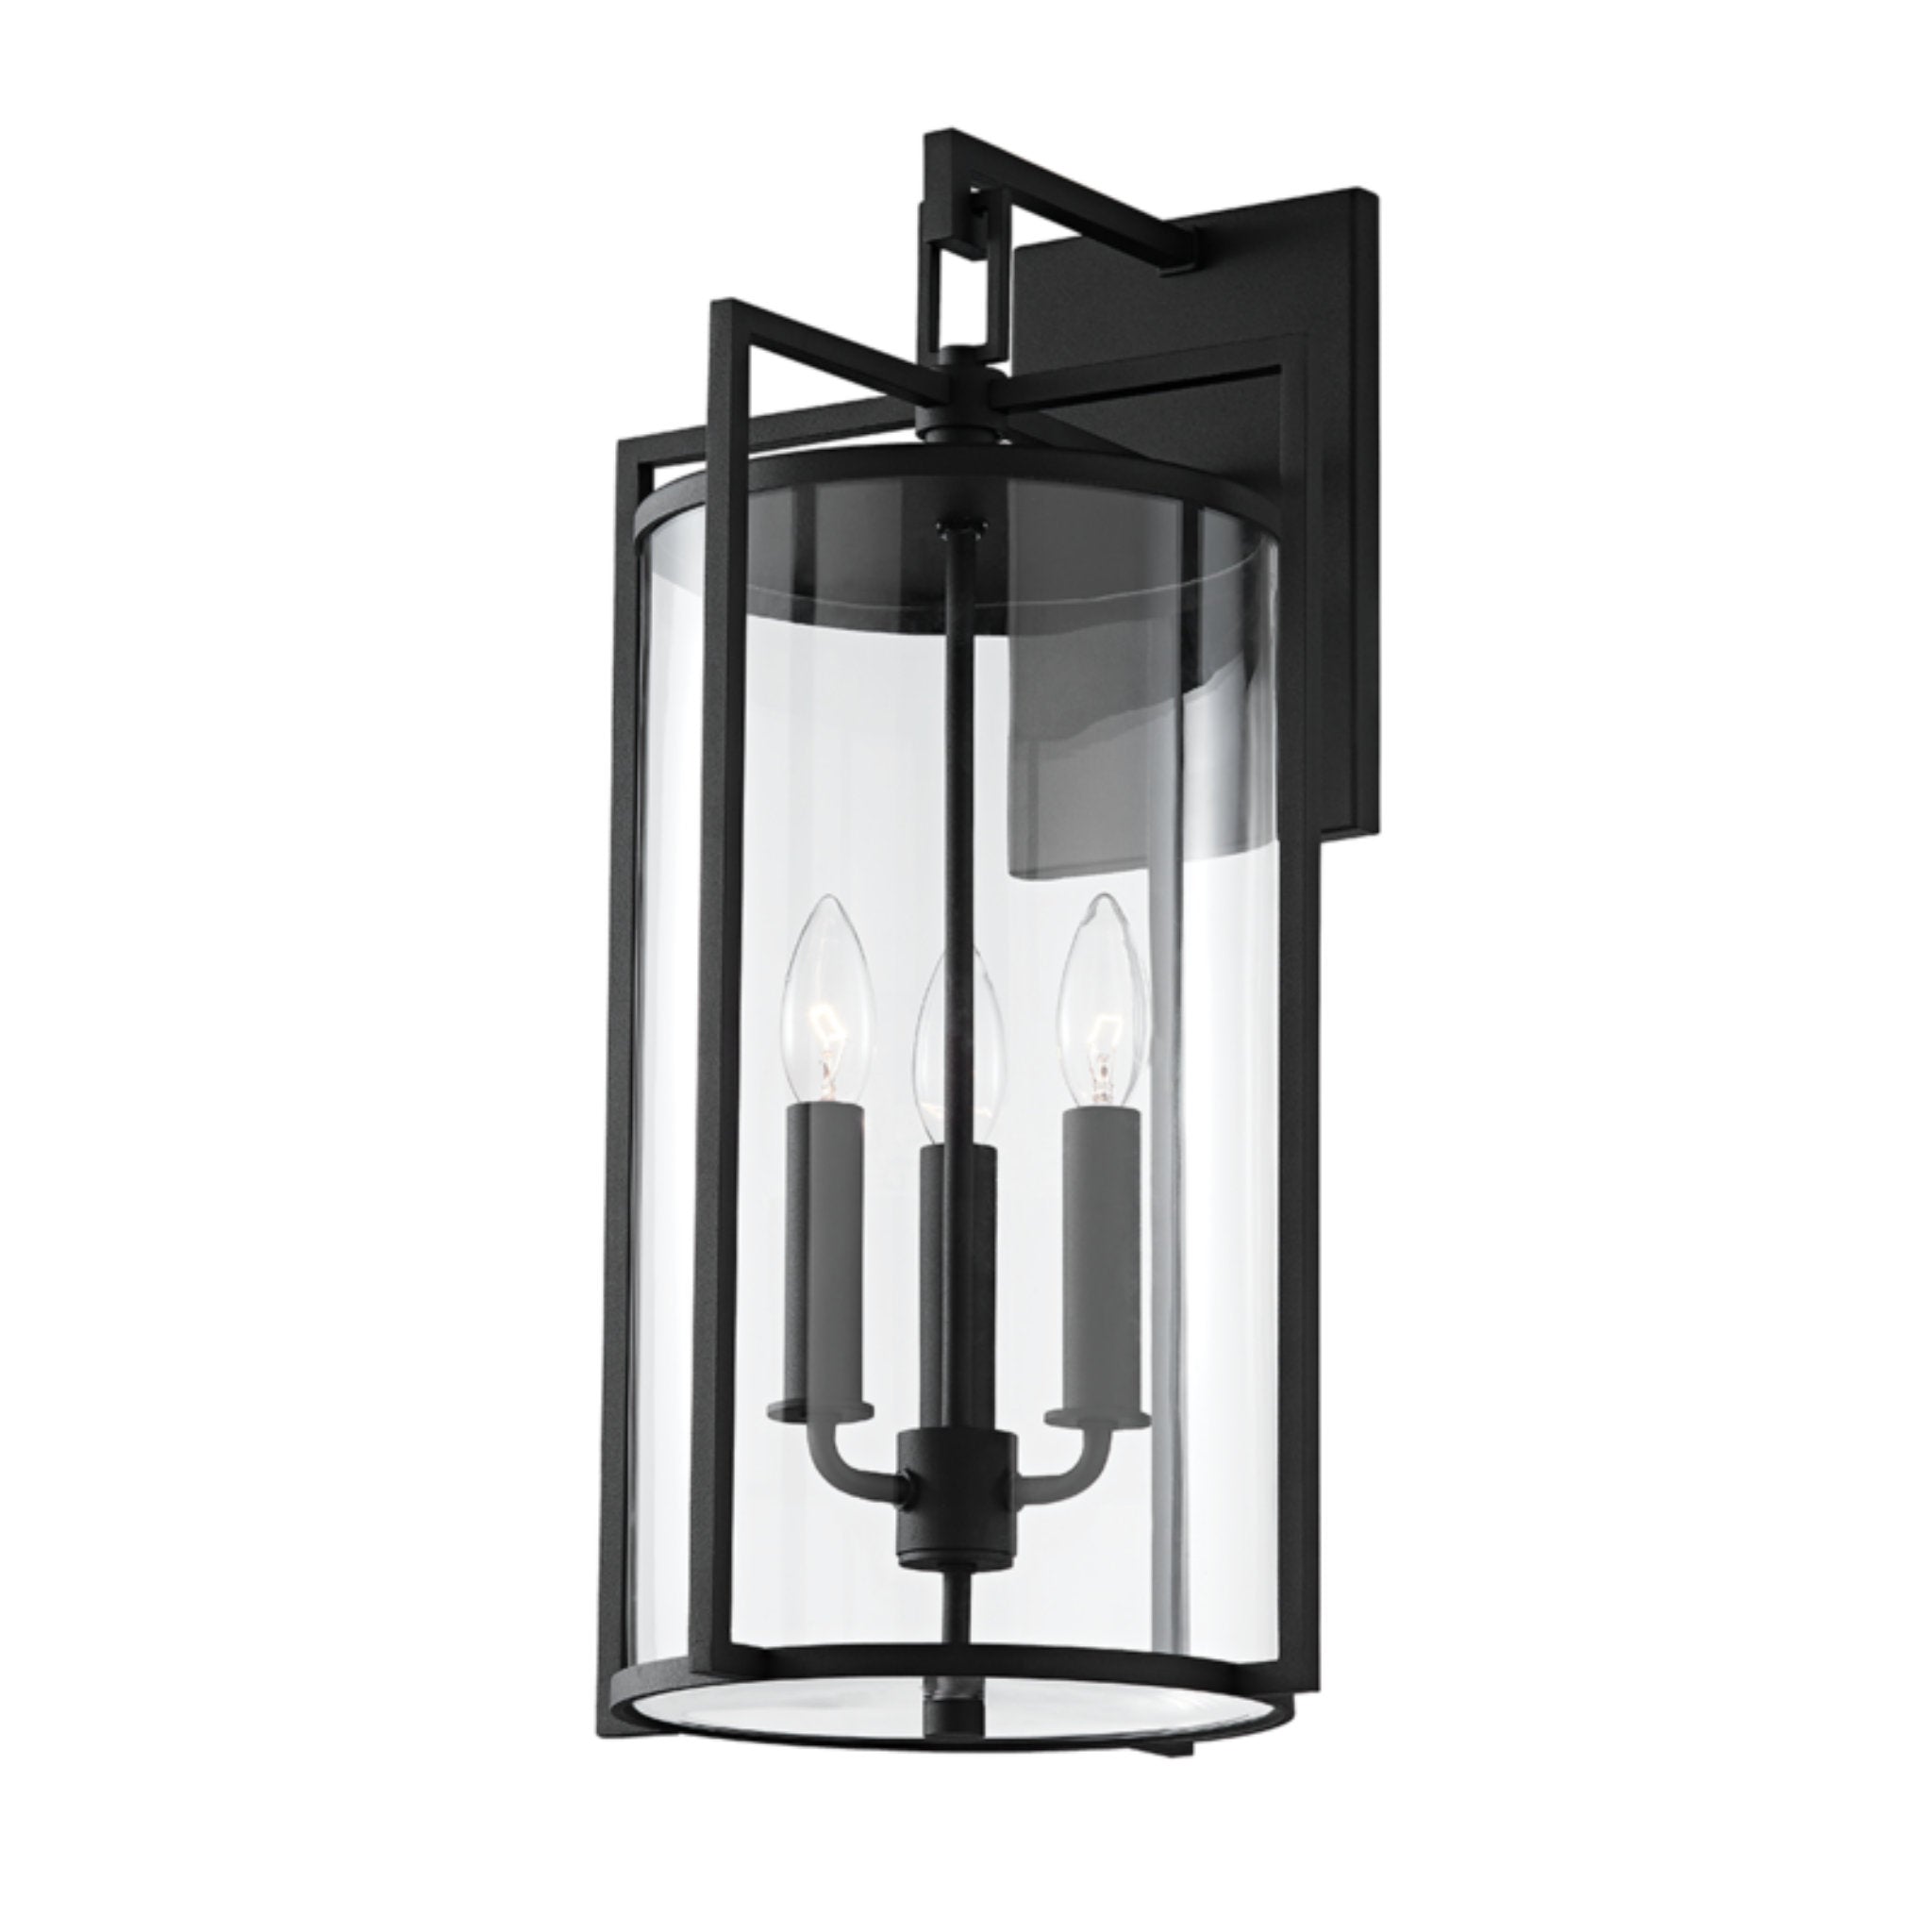 Percy 3 Light Wall Sconce in Textured Black